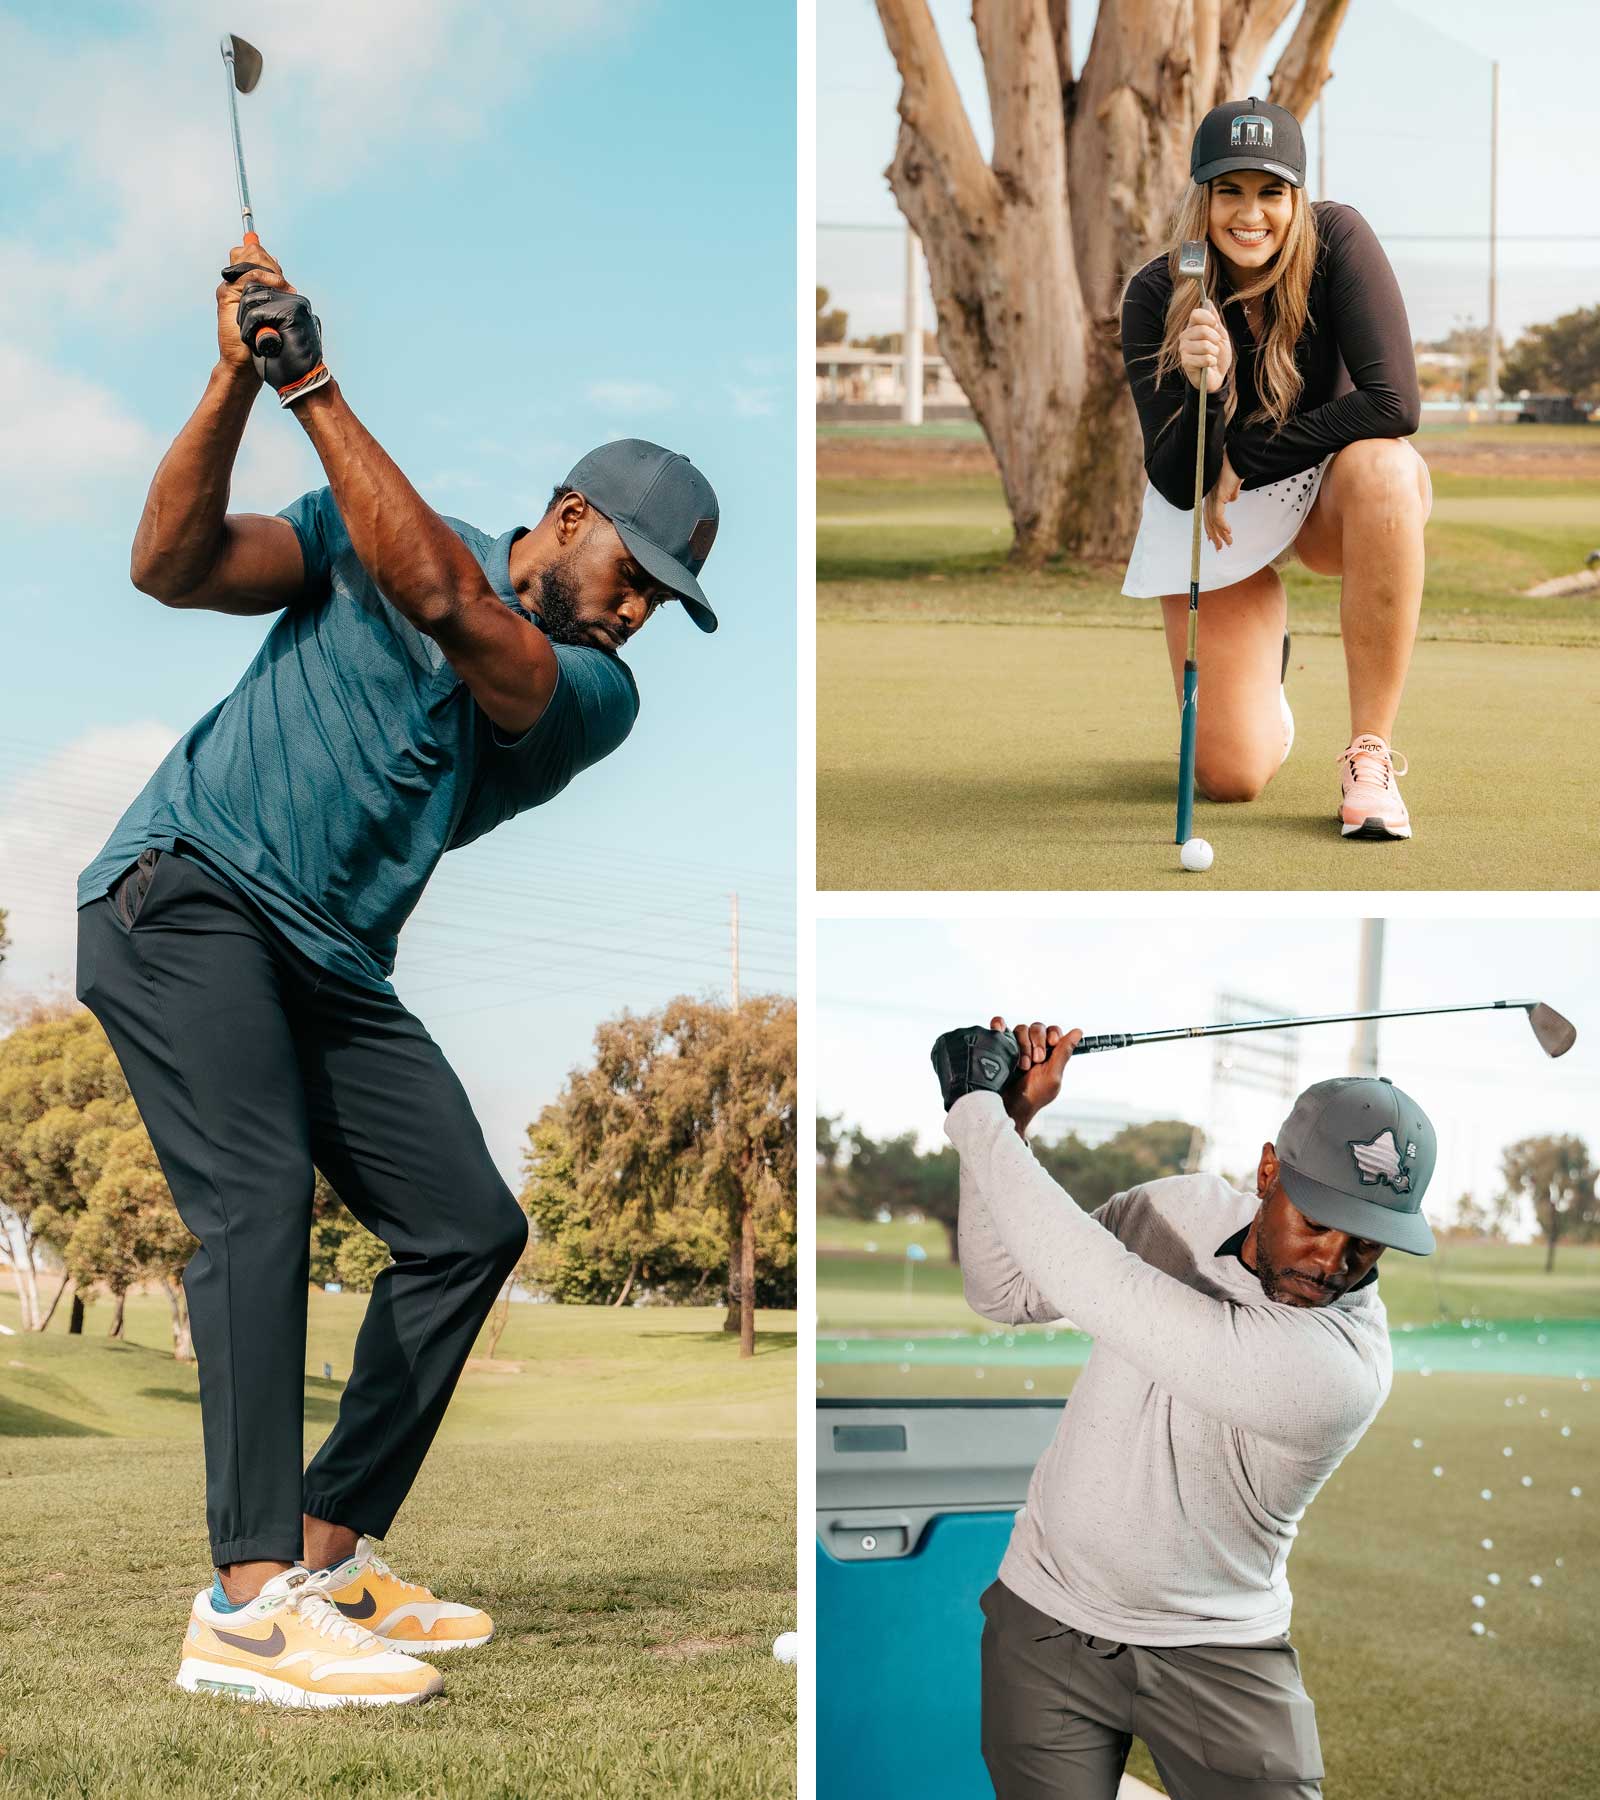 Athletes And Entertainers Unite For Golf And Diversity At Change The Game -Reggie Bush and Jenna Brady-Jimmy-Rollins